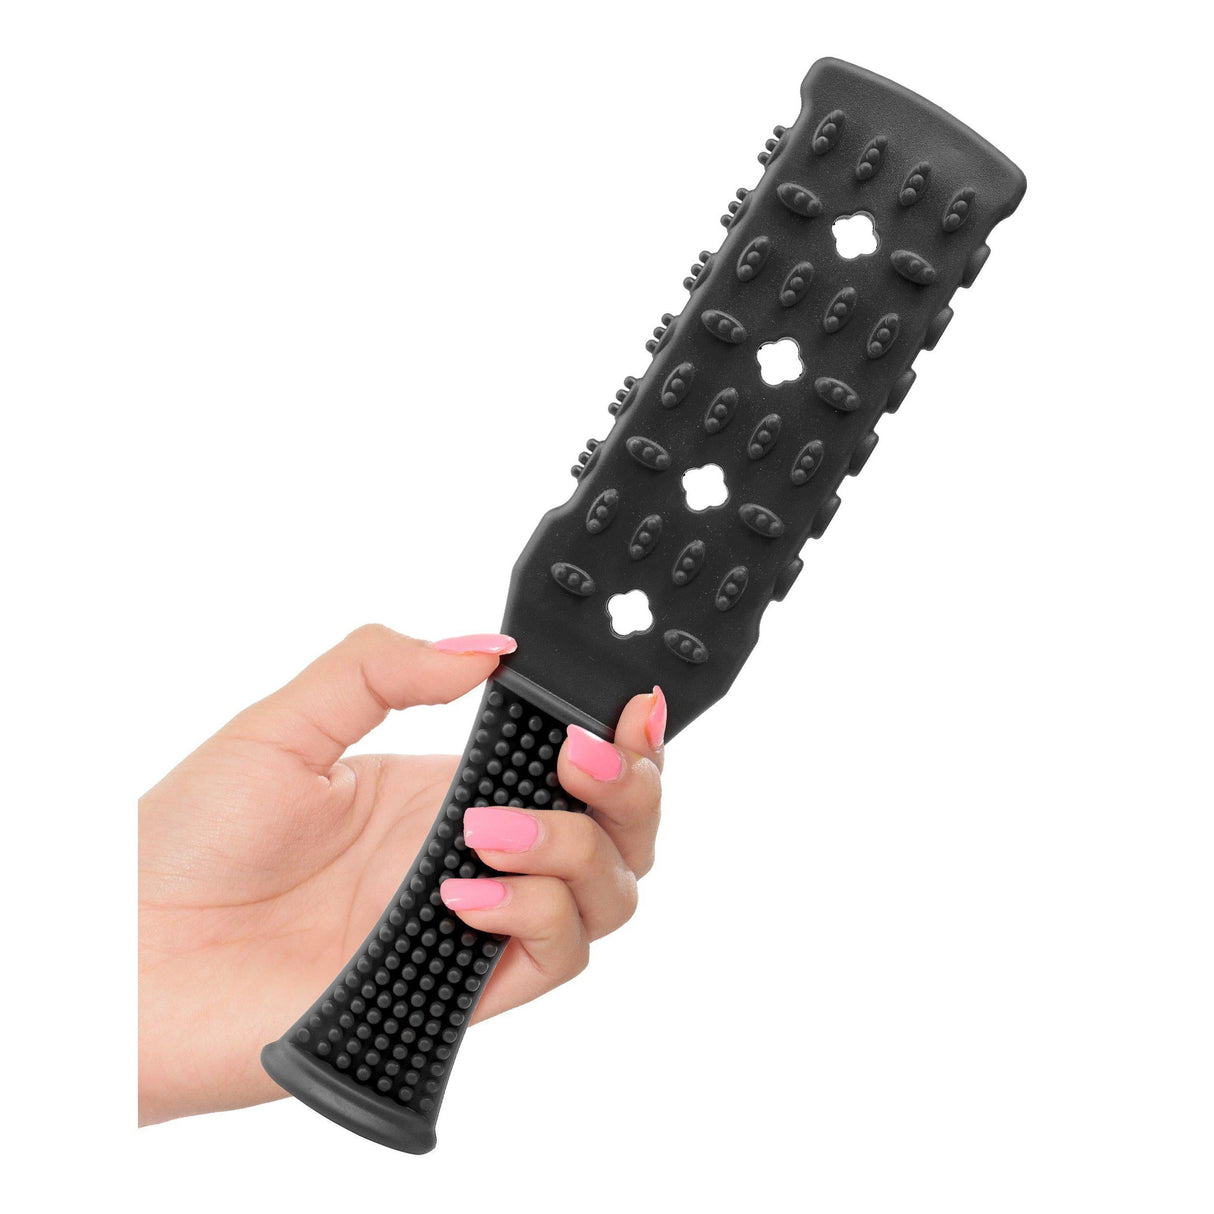 Fetish Fantasy Series Textured Rubber Paddle